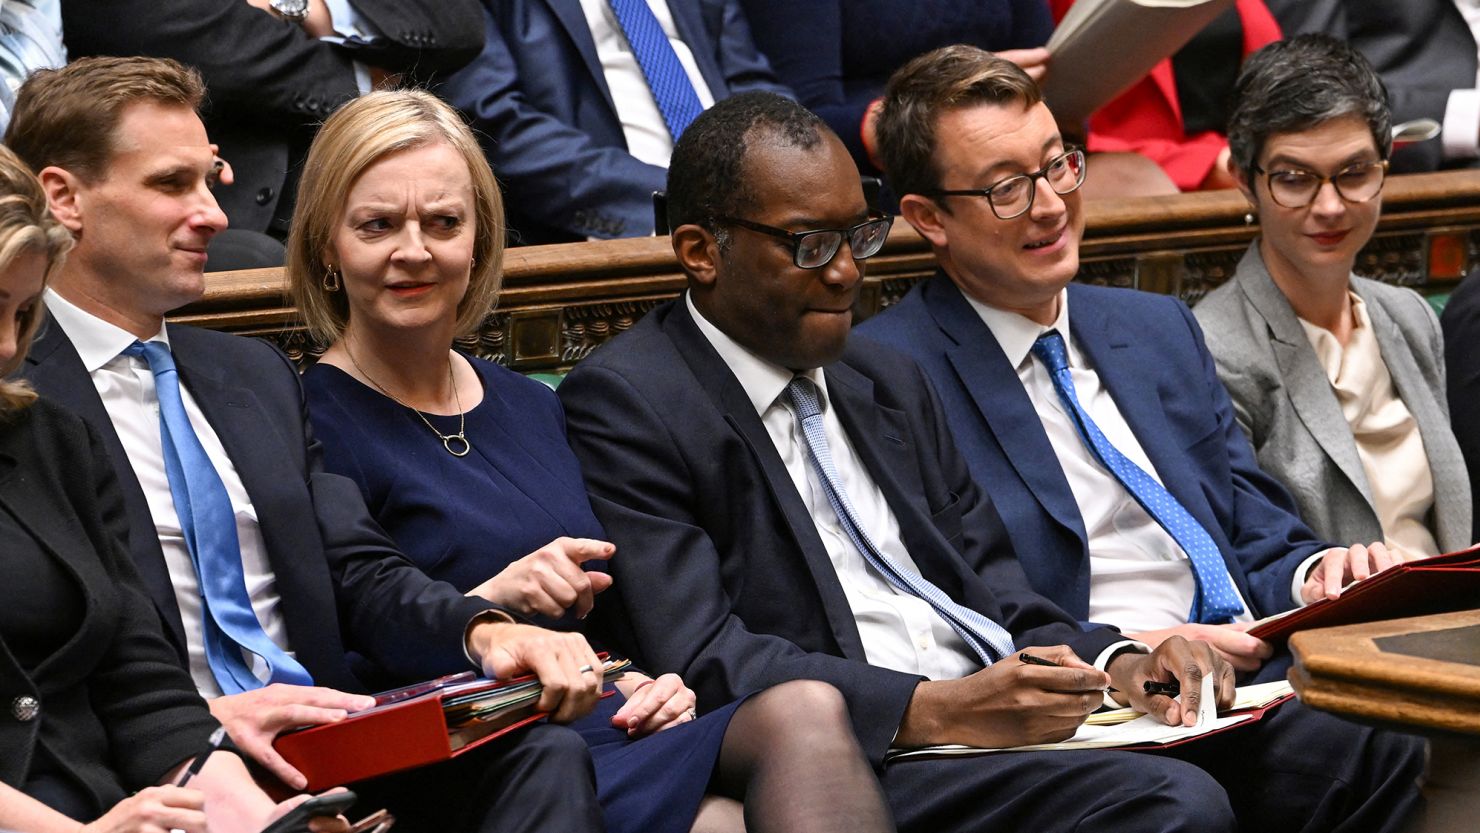 Will British Prime Minister Liz Truss and the Chancellor of the Exchequer Kwasi Kwarteng be able to turn things around for the Conservatives?
